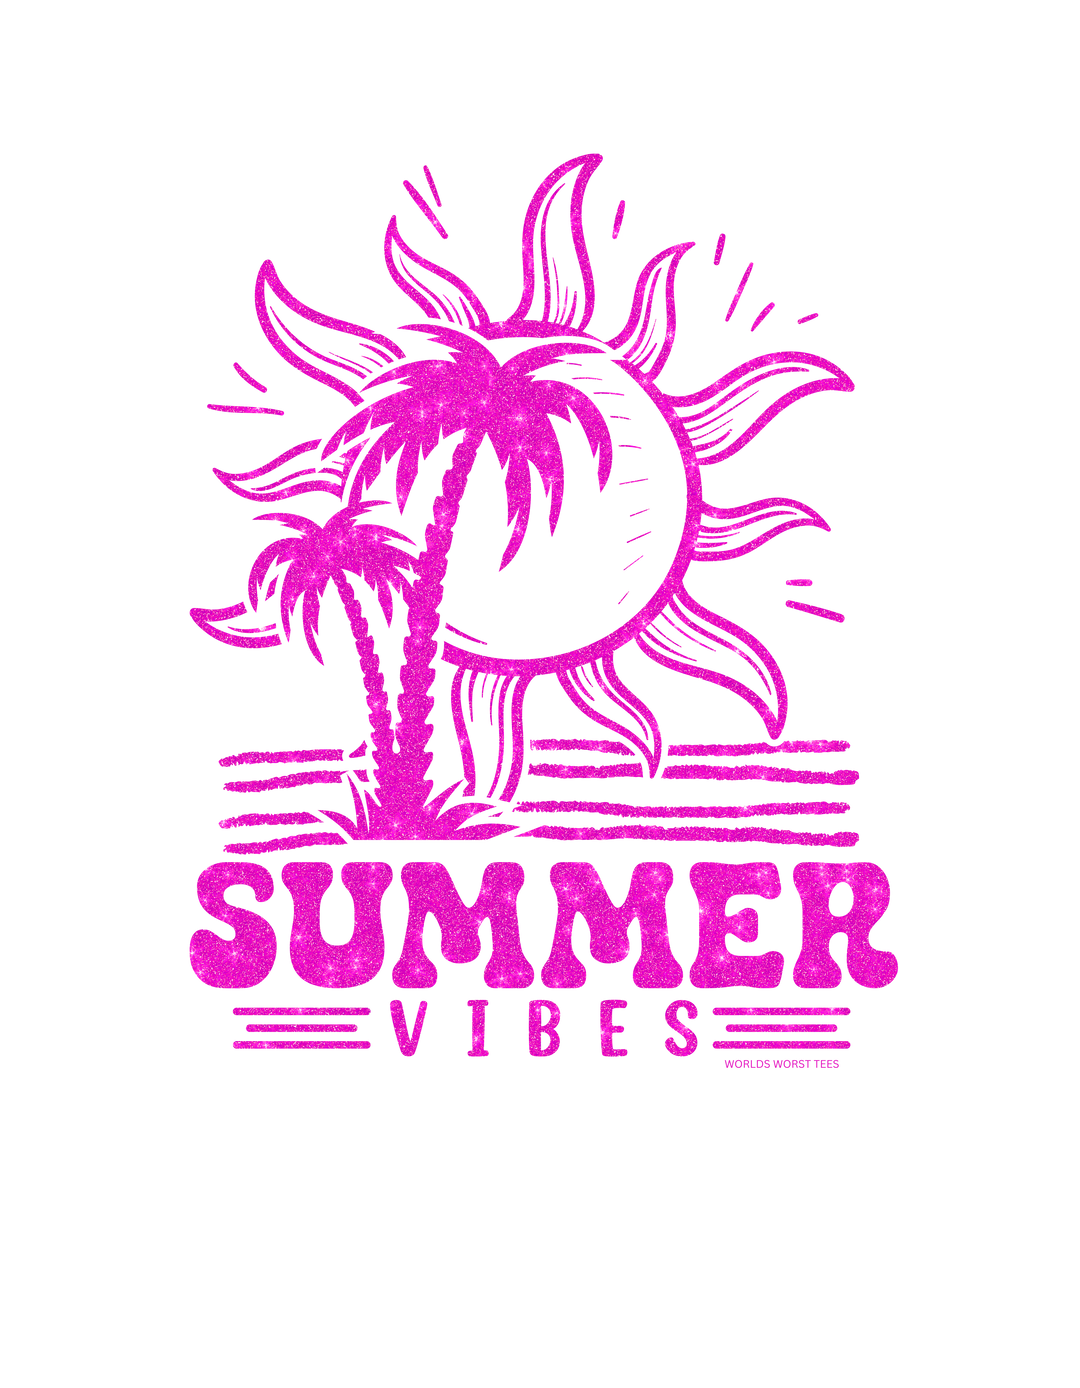 A pink glittery graphic of palm trees and a sun on a Summer Vibes Kids Tee by Worlds Worst Tees. 100% combed ringspun cotton, light fabric, classic fit, perfect for active kids.